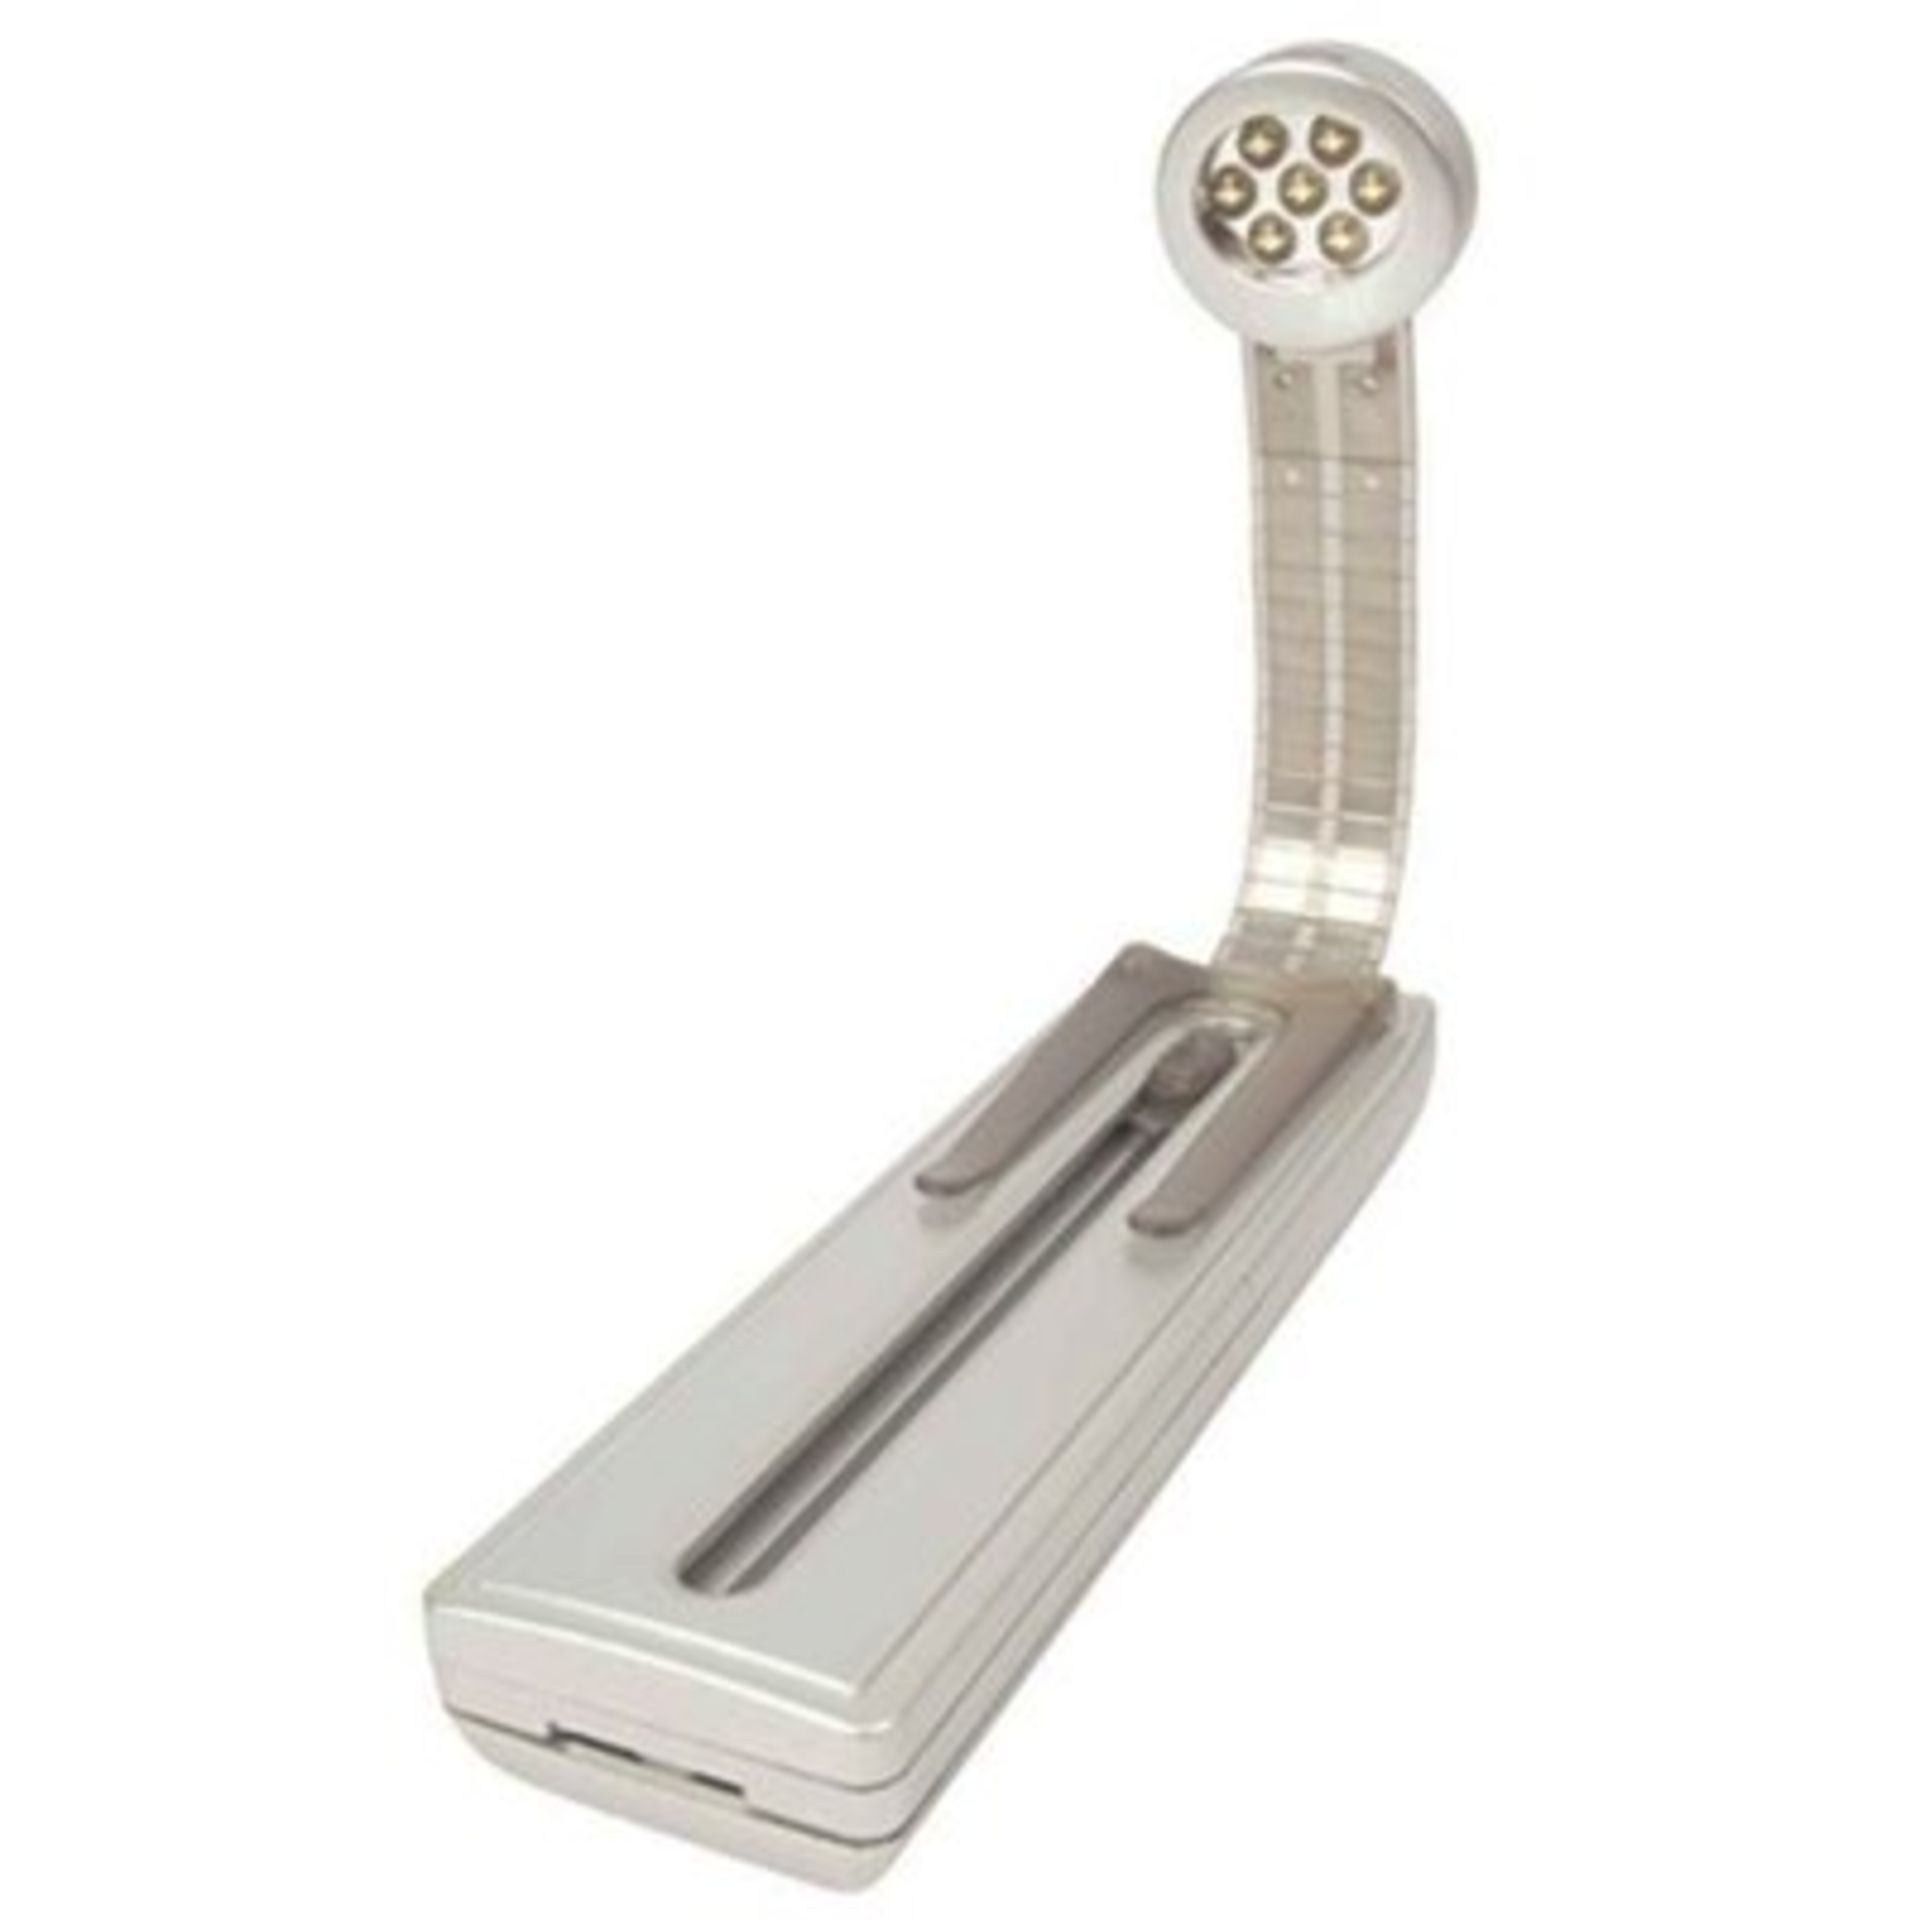 V Brand New Tritronic 7 LED Reading Light With Clip & Stand X 2 YOUR BID PRICE TO BE MULTIPLIED BY - Image 2 of 2